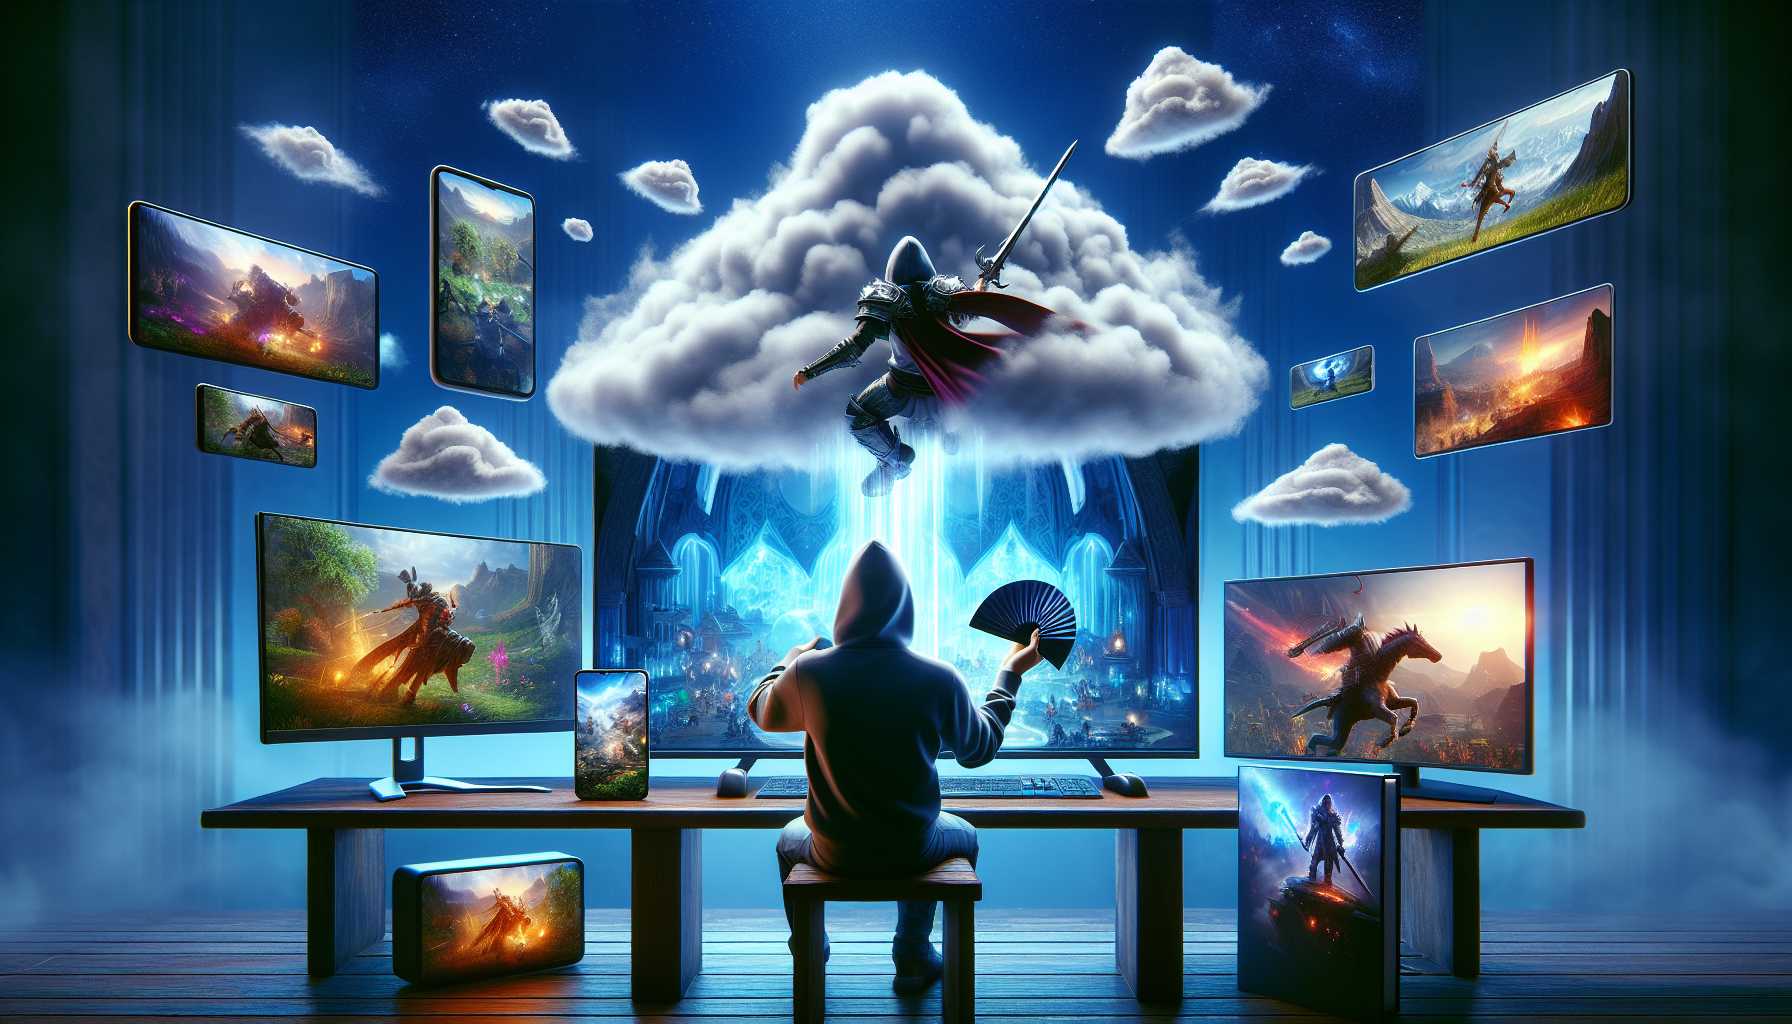 Fantasy of playing a cloud-based game on varied digital devices